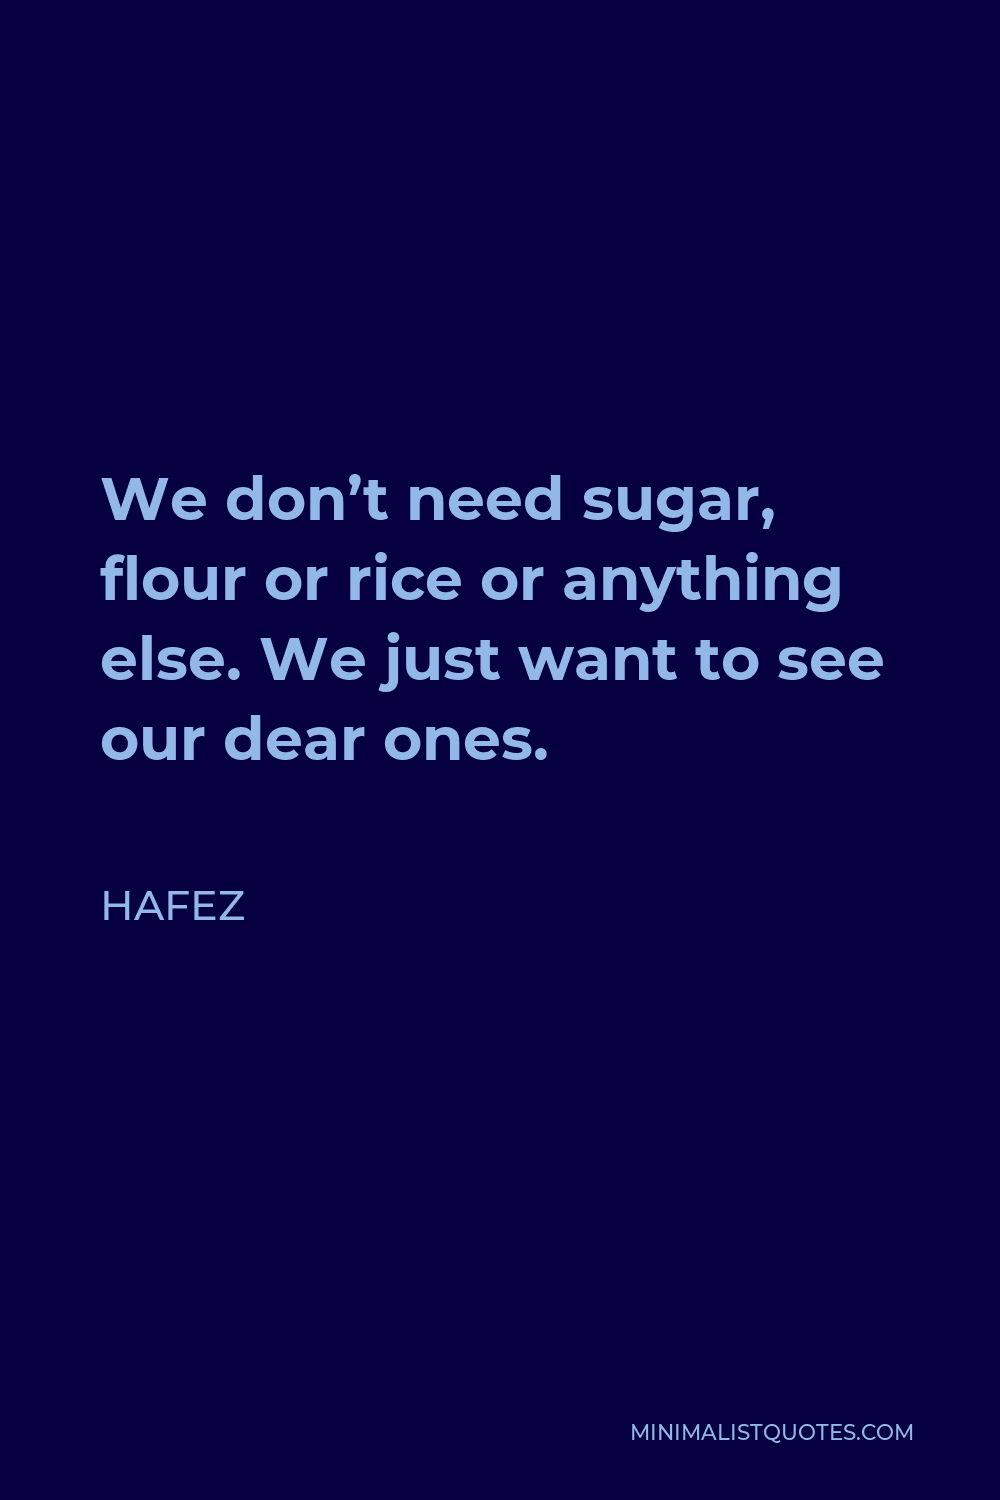 Hafez Quote - We don’t need sugar, flour or rice or anything else. We just want to see our dear ones.